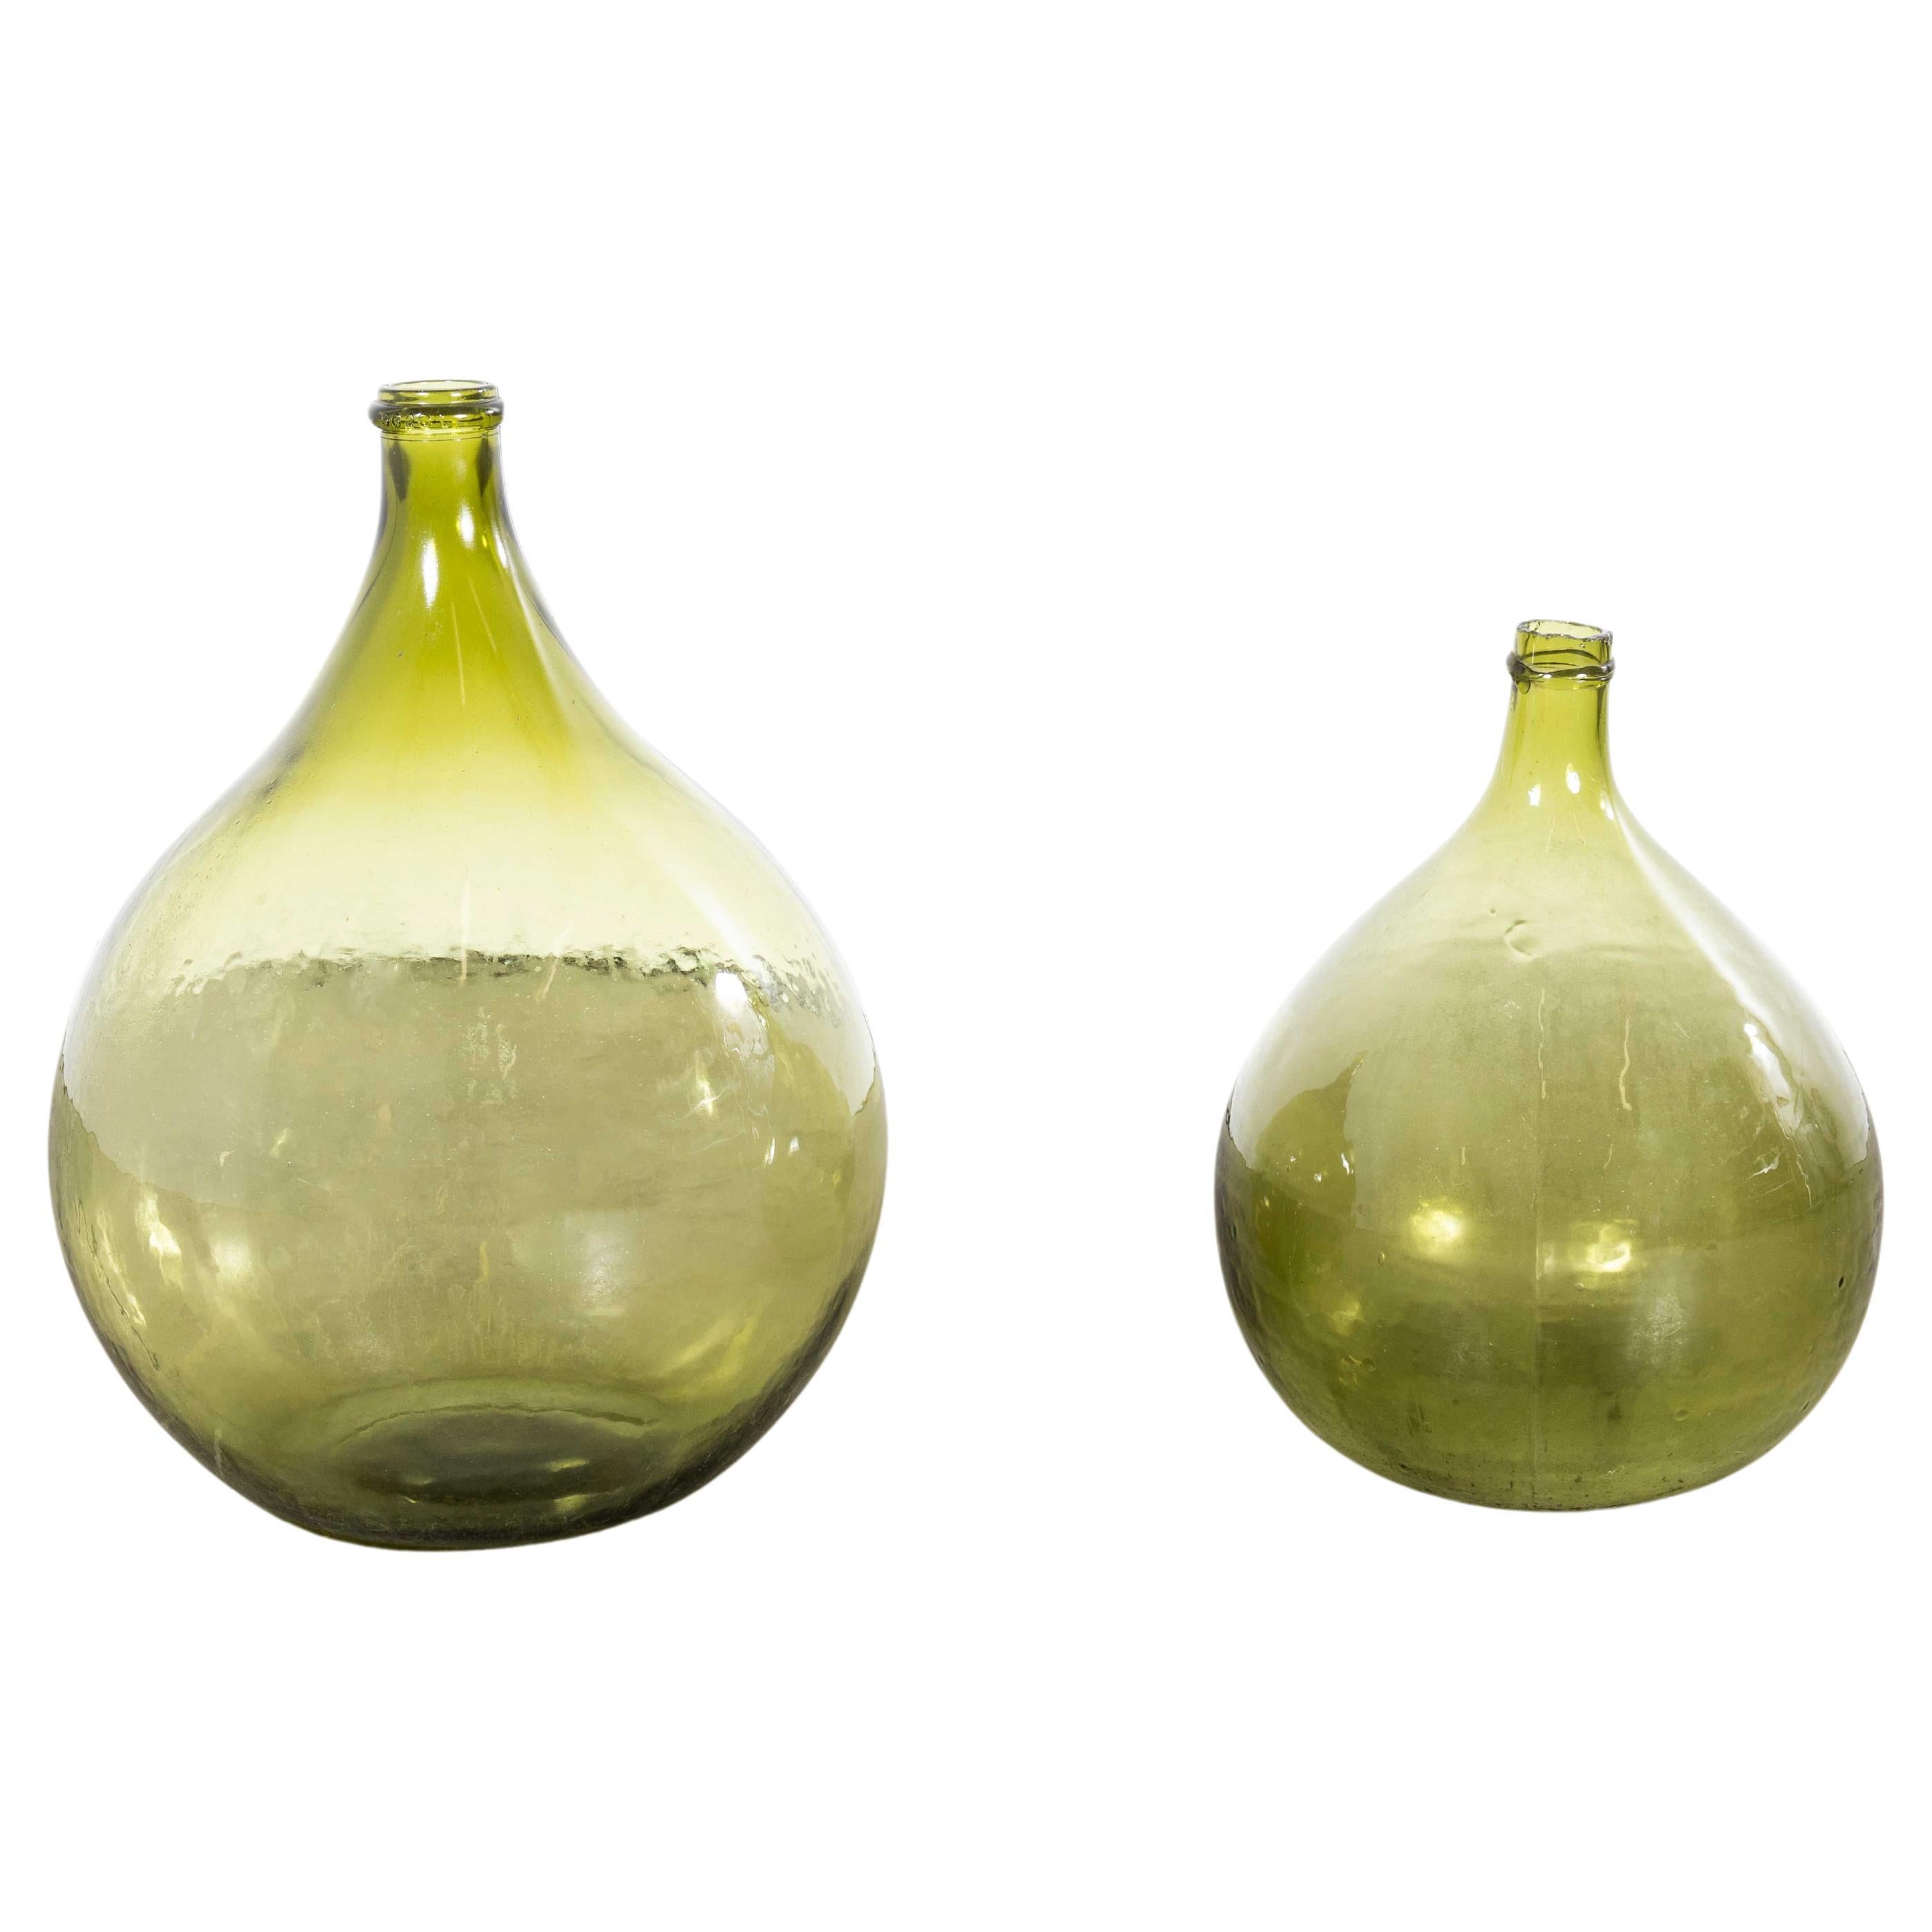 Vintage French Glass Demijohns - Pair (957.19) For Sale